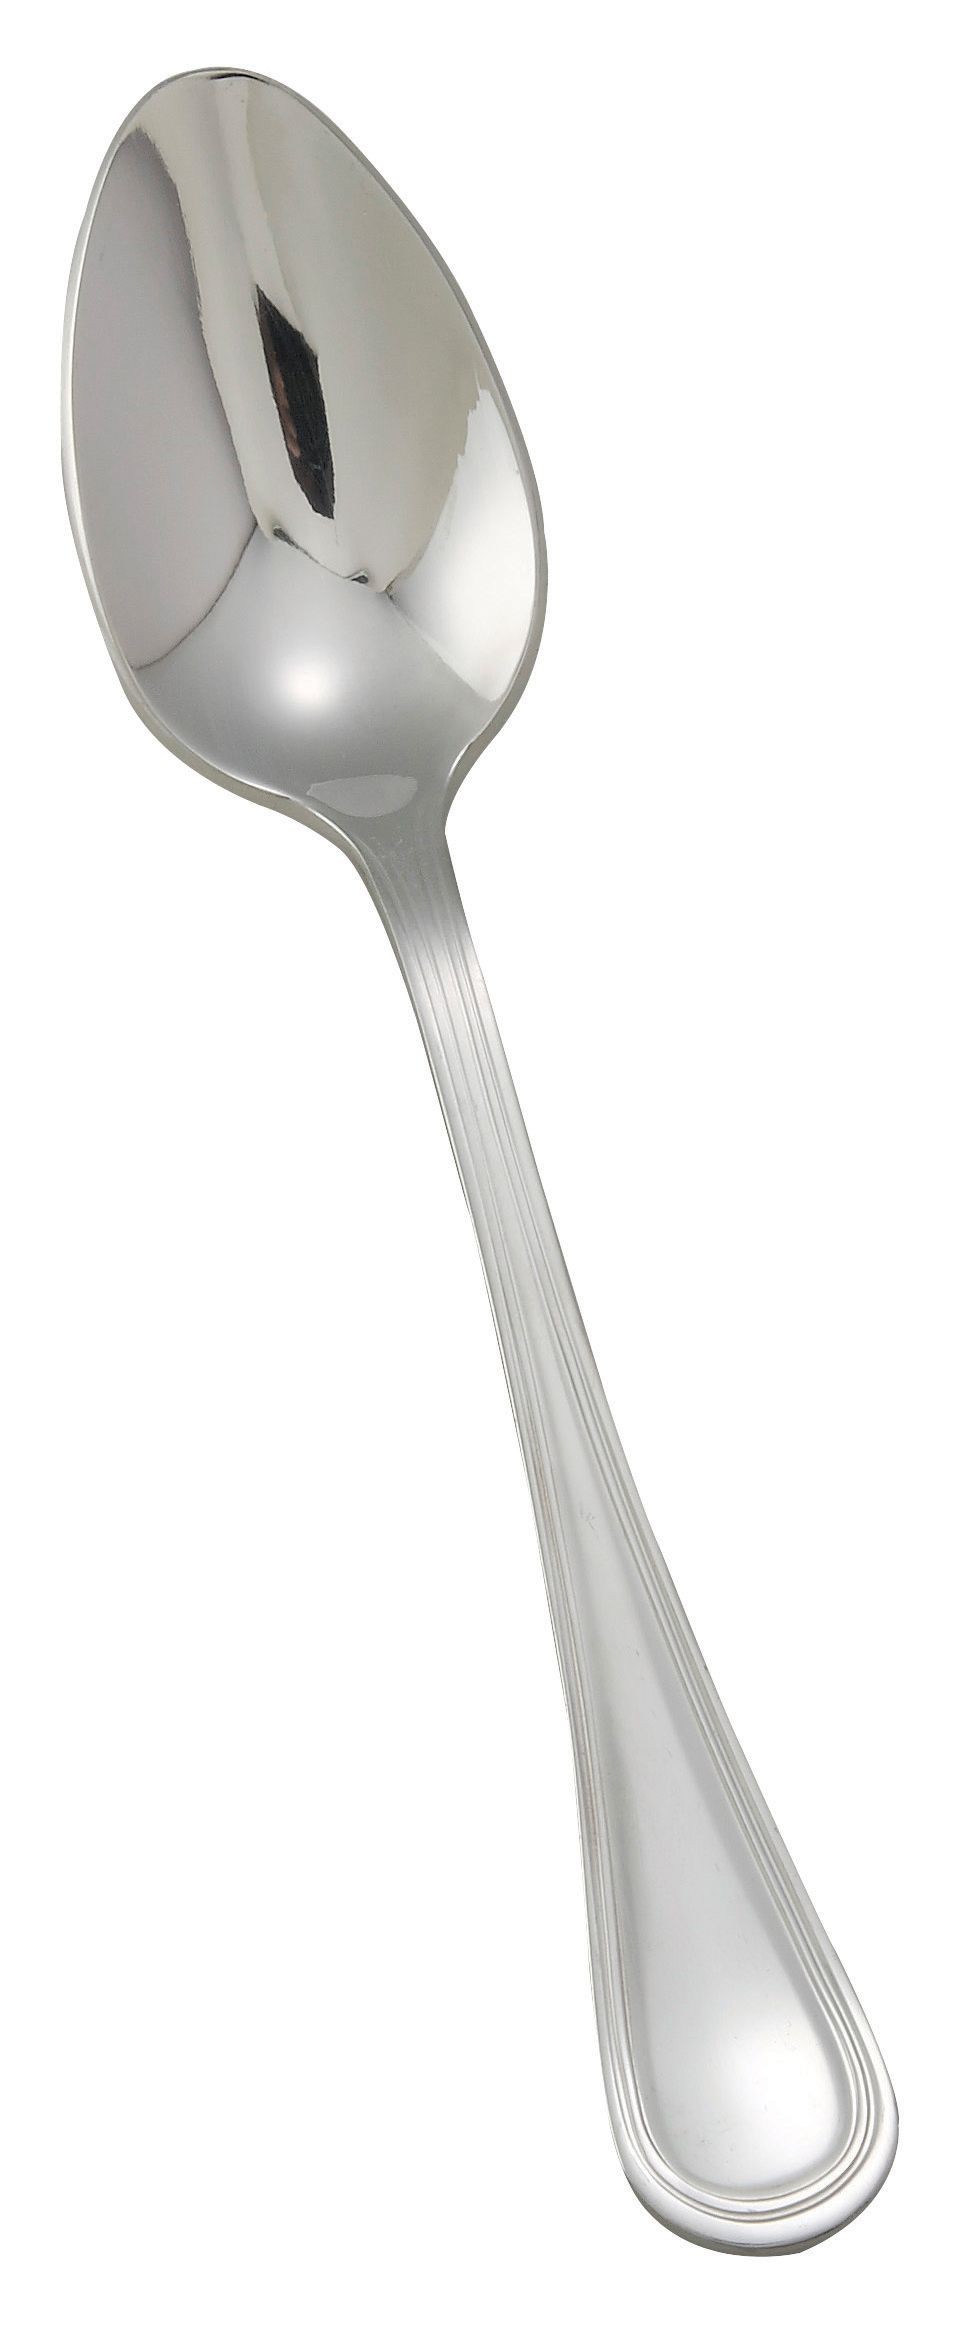 Winco 0030-03 Shangarila Extra Heavy Stainless Steel Dinner Spoon (12/Pack)